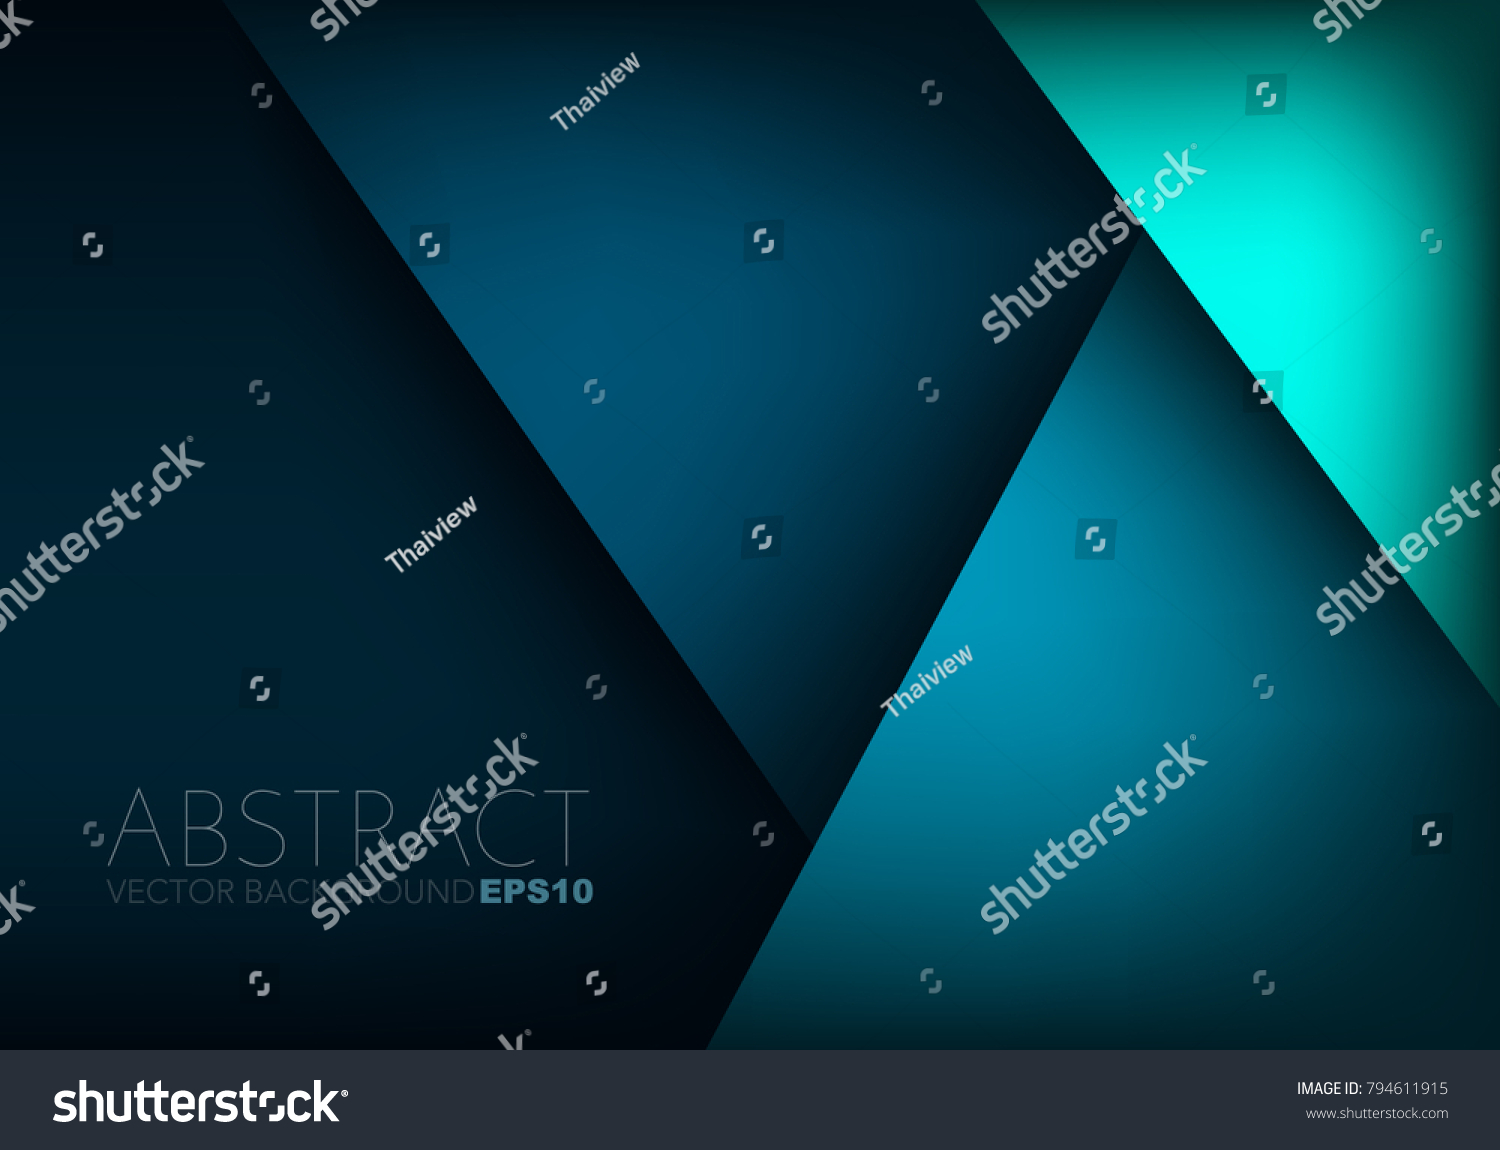 Green turquoise and Blue background vector overlap layer on dark space for background design #794611915